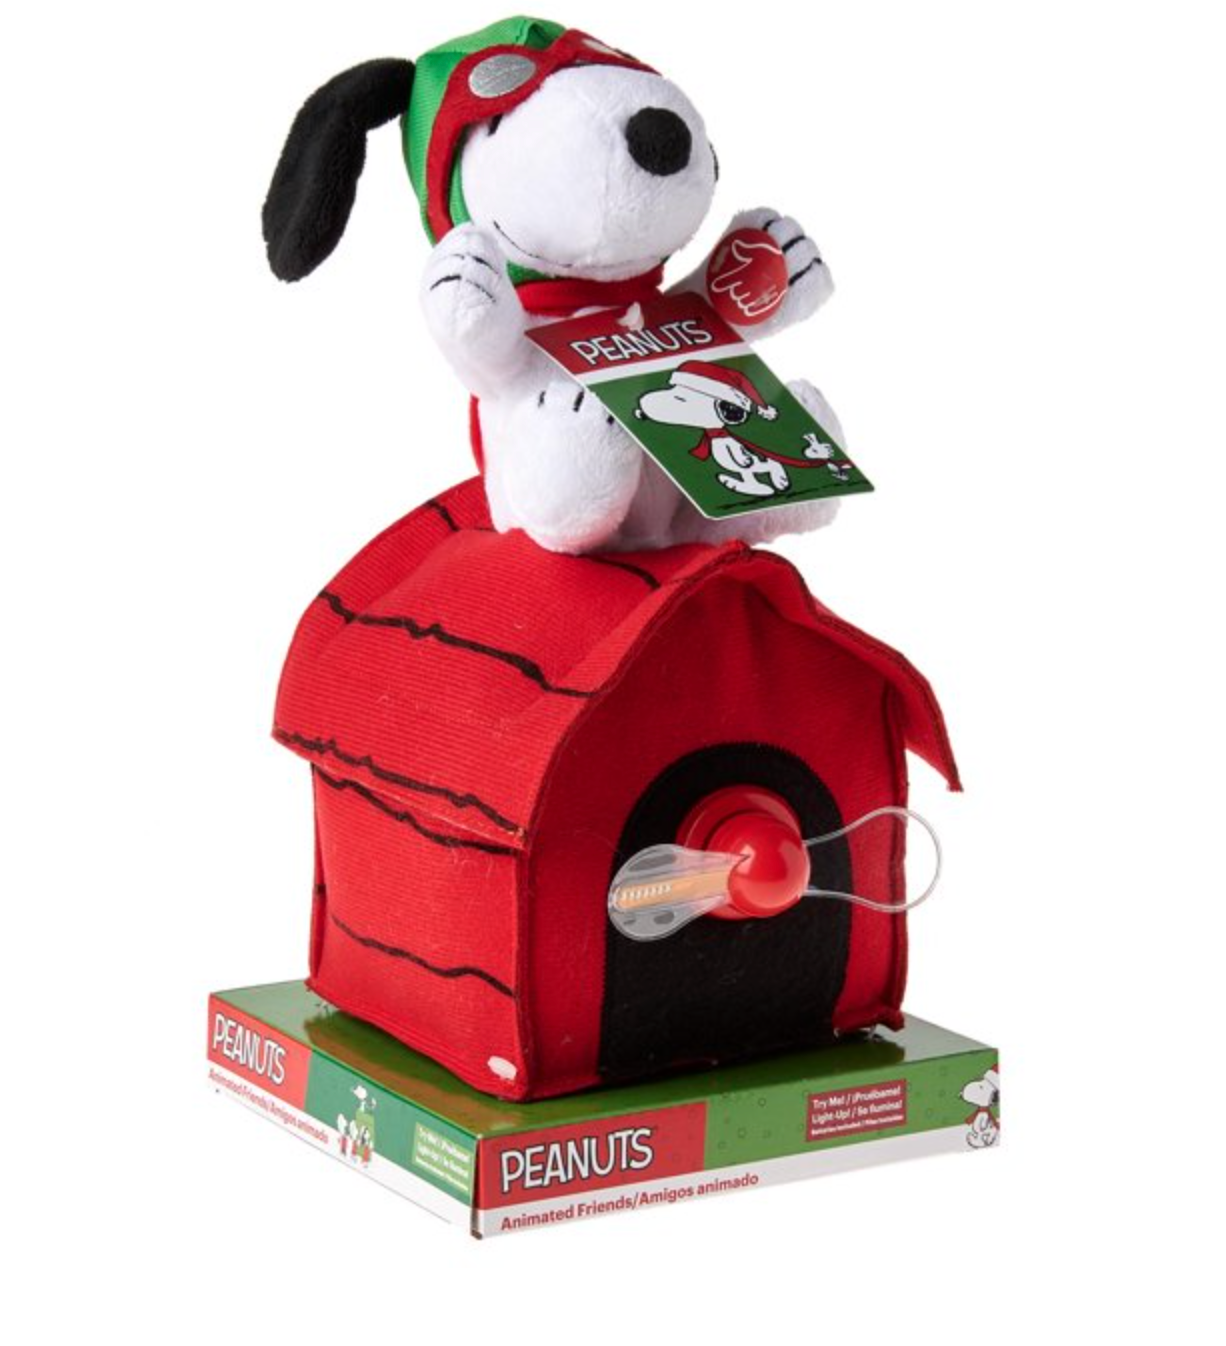 Peanuts Flying Ace Snoopy Sitting on Doghouse Animated 11" Plush Toy New w Tag